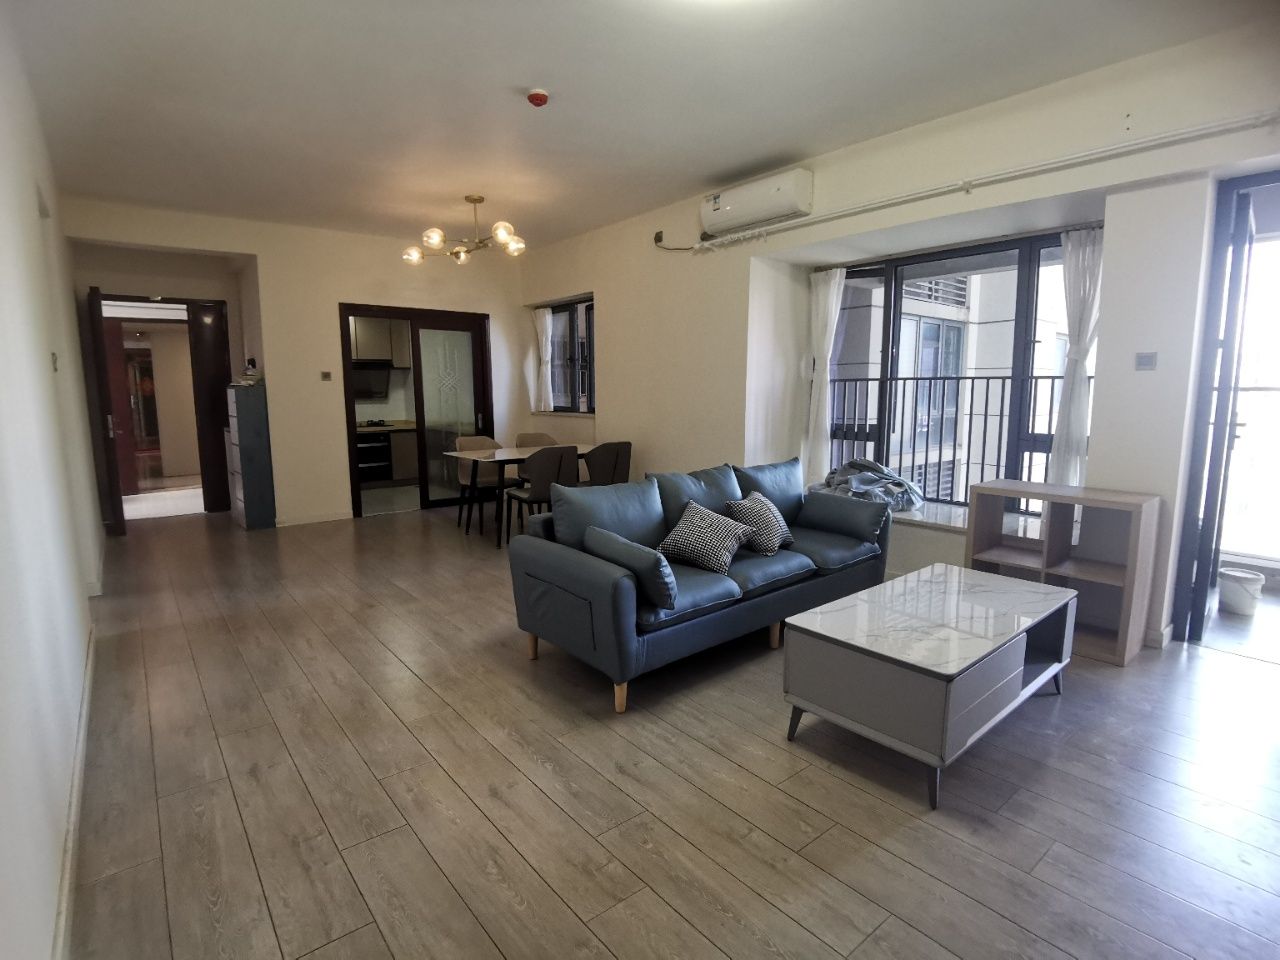 Featured image for “3bedrooms2 bathroom good quality apartment in shekou”